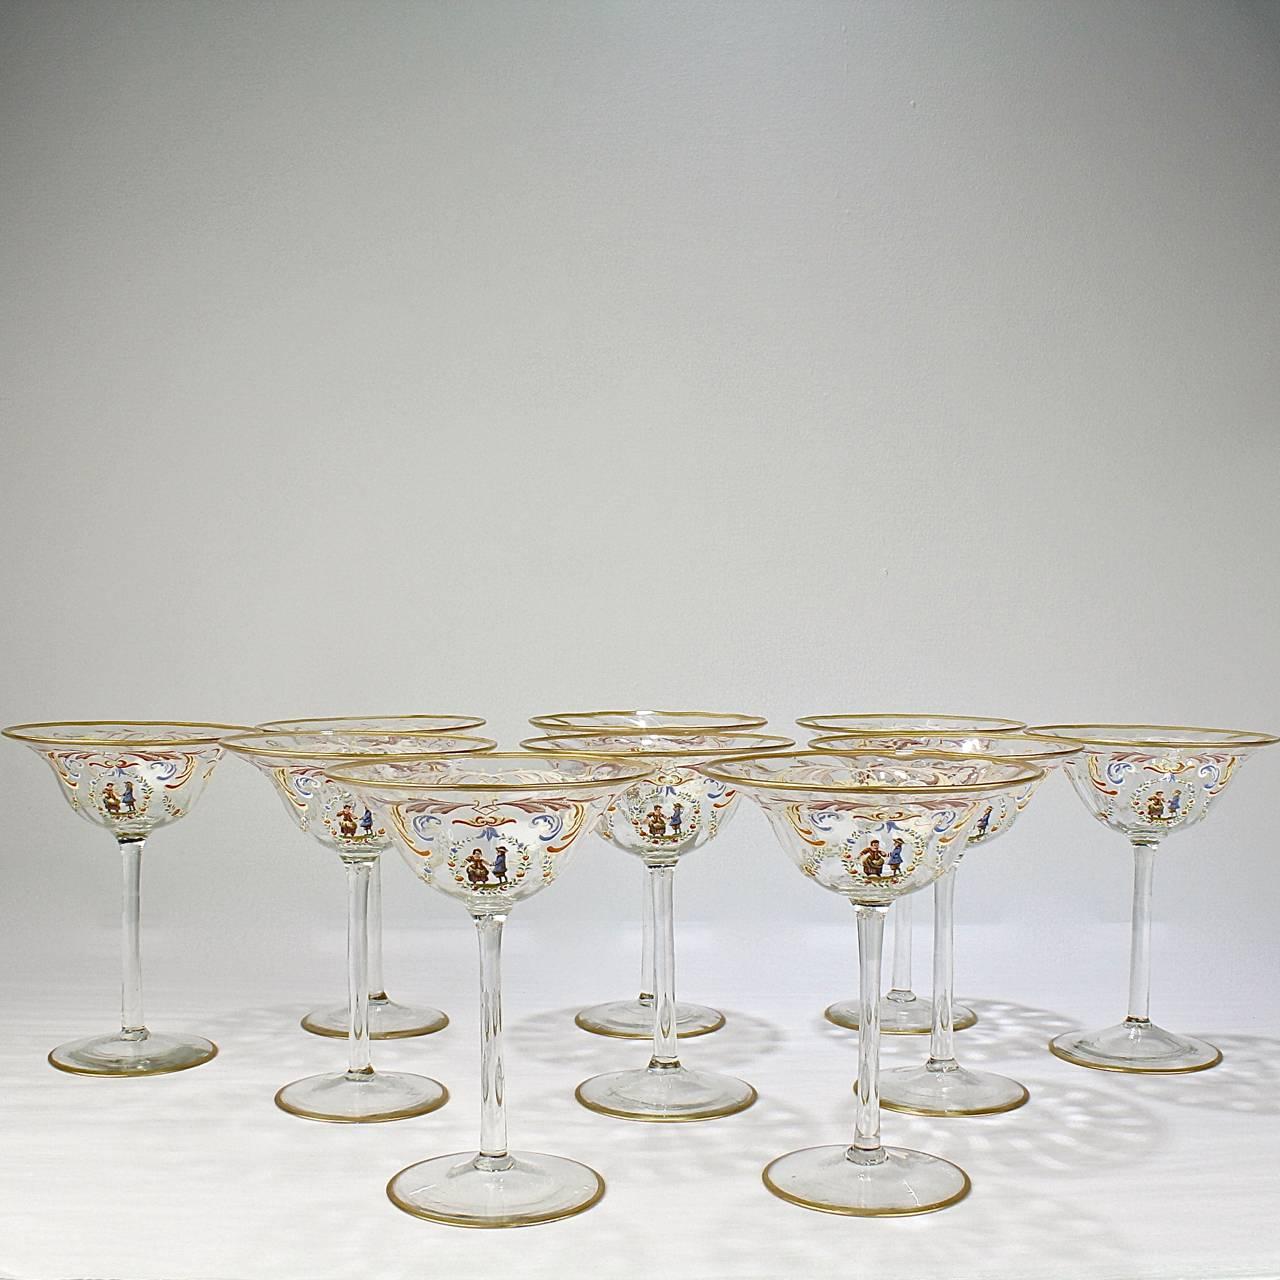 A set of ten enamelled Italian or Venetian glass champagne glasses. 

With polychrome Florentine enamel decoration, a central cartouche bearing a peasant couple surrounded by a wreath with rose, and gilded feet and rims.

Attributed to Salviati.